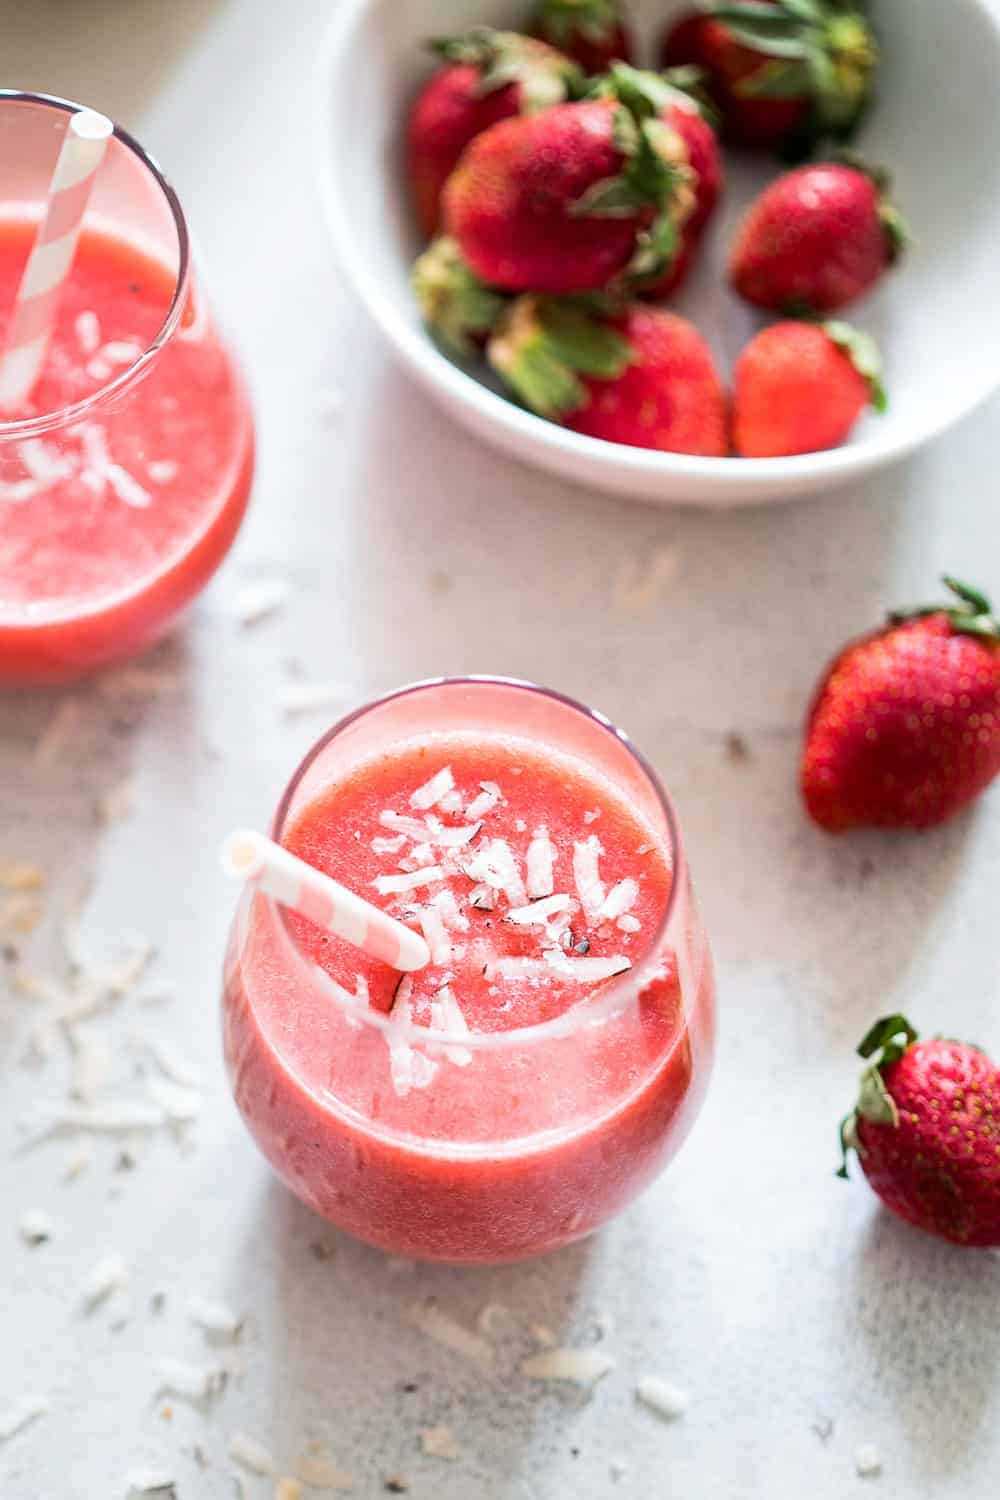 Simple, healthy strawberry banana coconut smoothie made with fresh fruits for a great start to your day! This breakfast smoothie is vegan, whole30 and paleo.